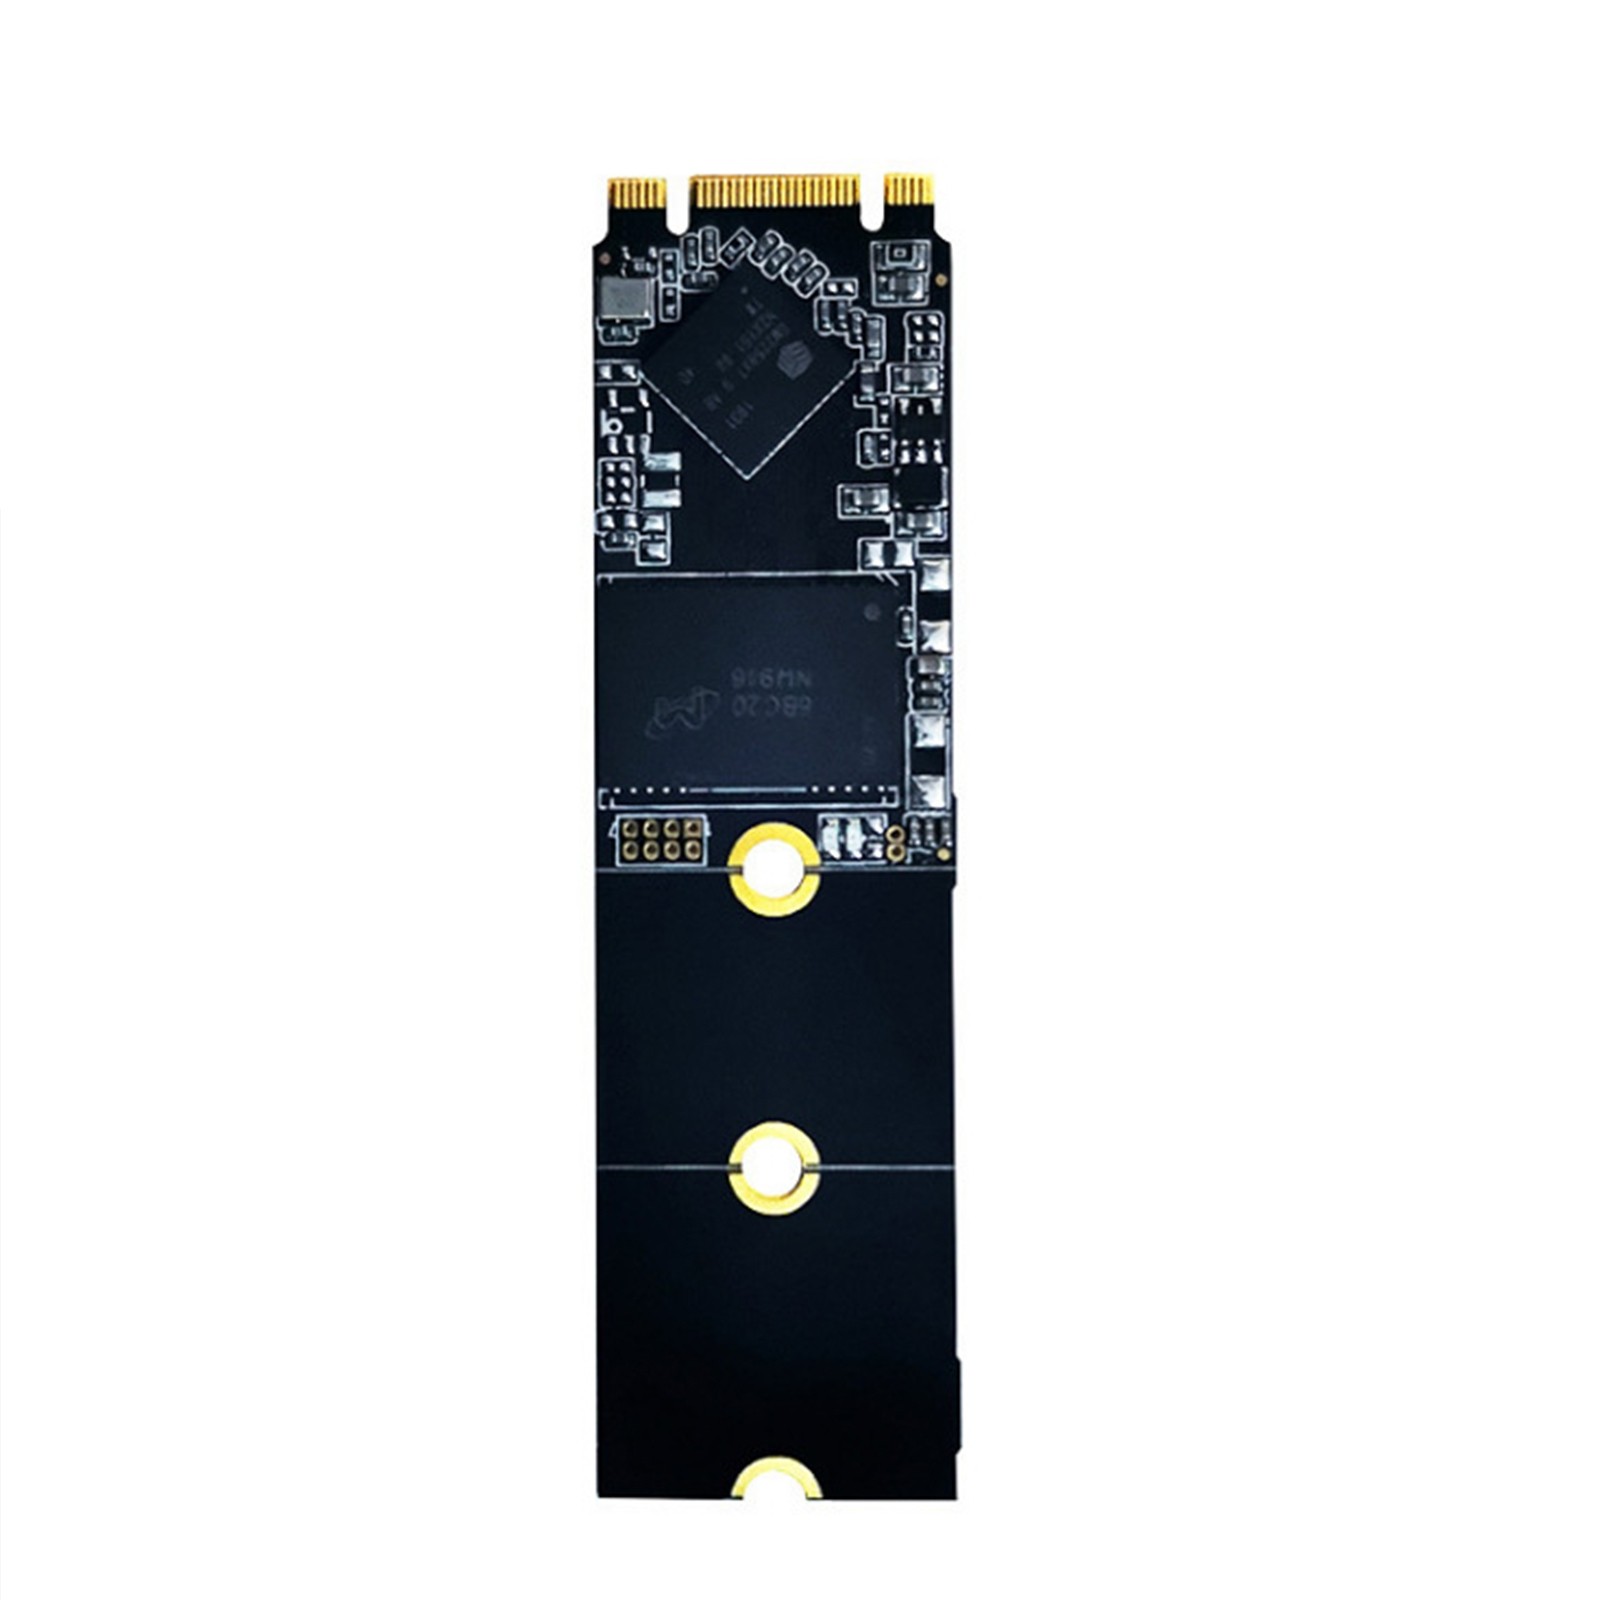 JingHai Solid State Drive M.2 2242 2260 2280 NGFF Half-Height Notebook High-Speed SSD, Capacity: 128GB